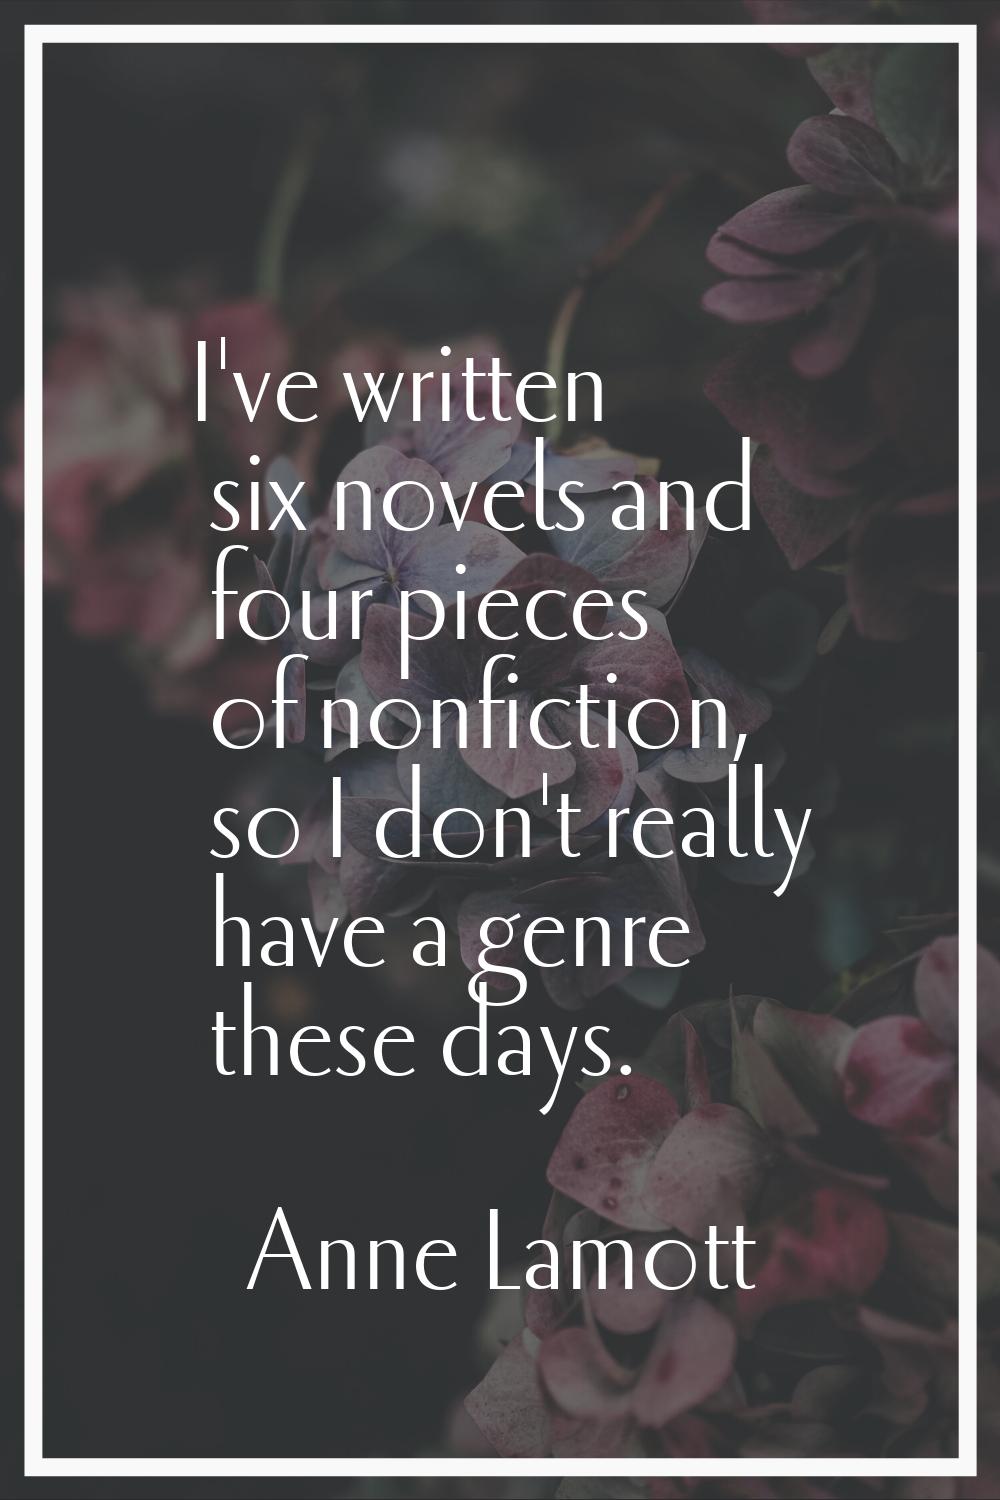 I've written six novels and four pieces of nonfiction, so I don't really have a genre these days.